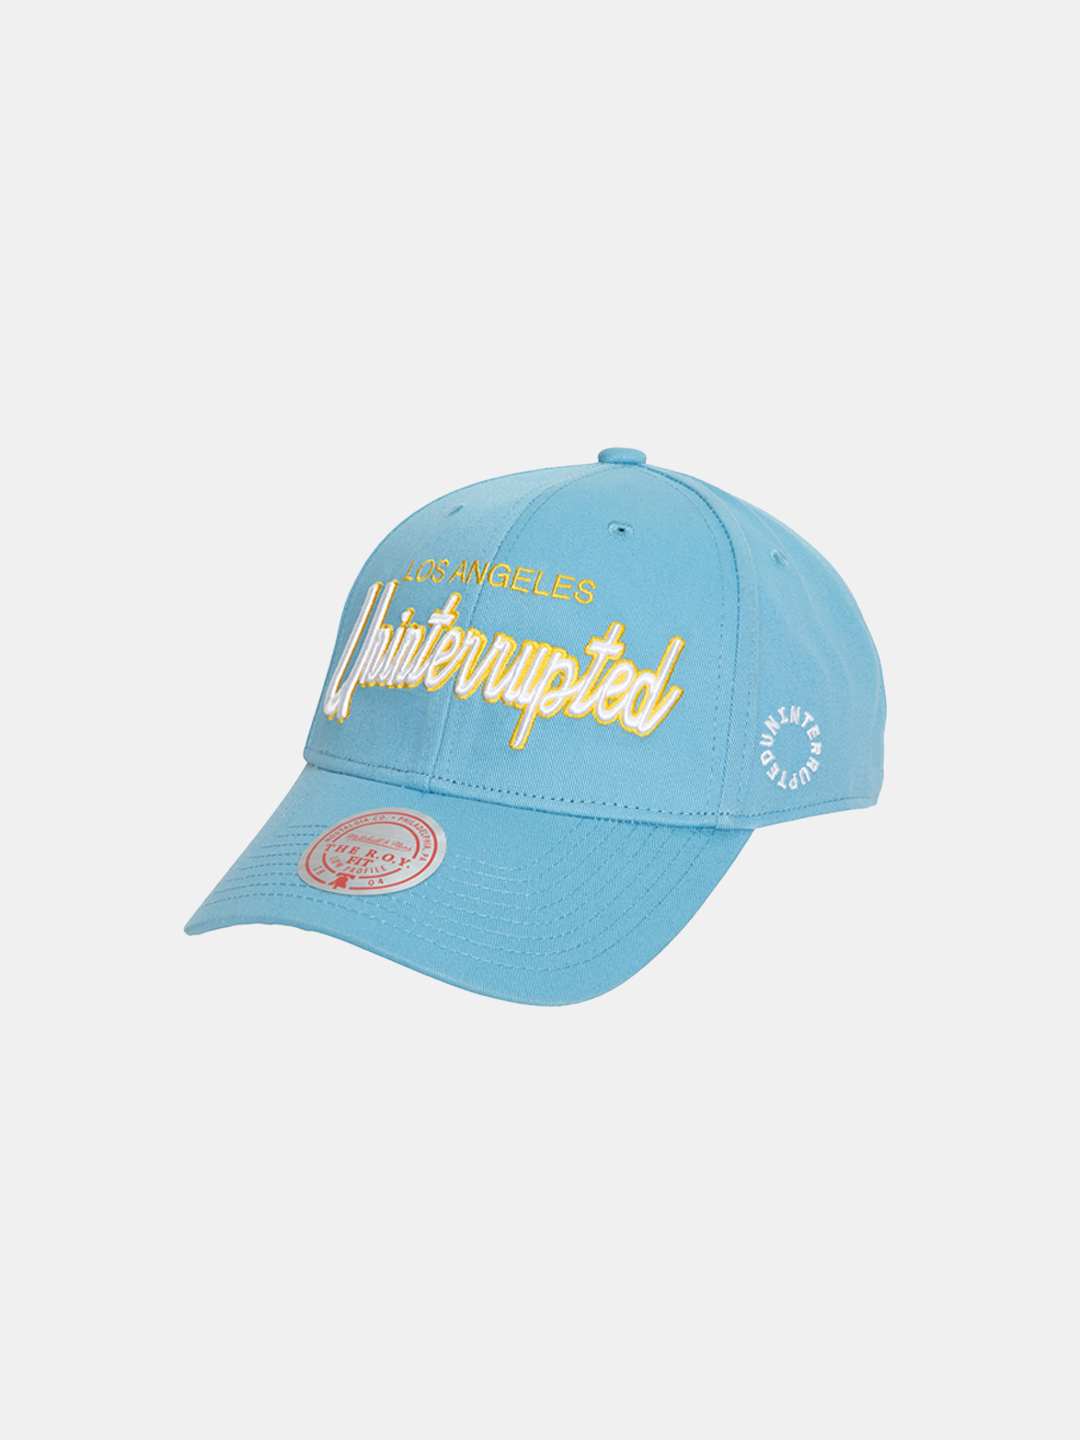 UNINTERRUPTED X Mitchell & Ness Legends Hat Lakers - Front